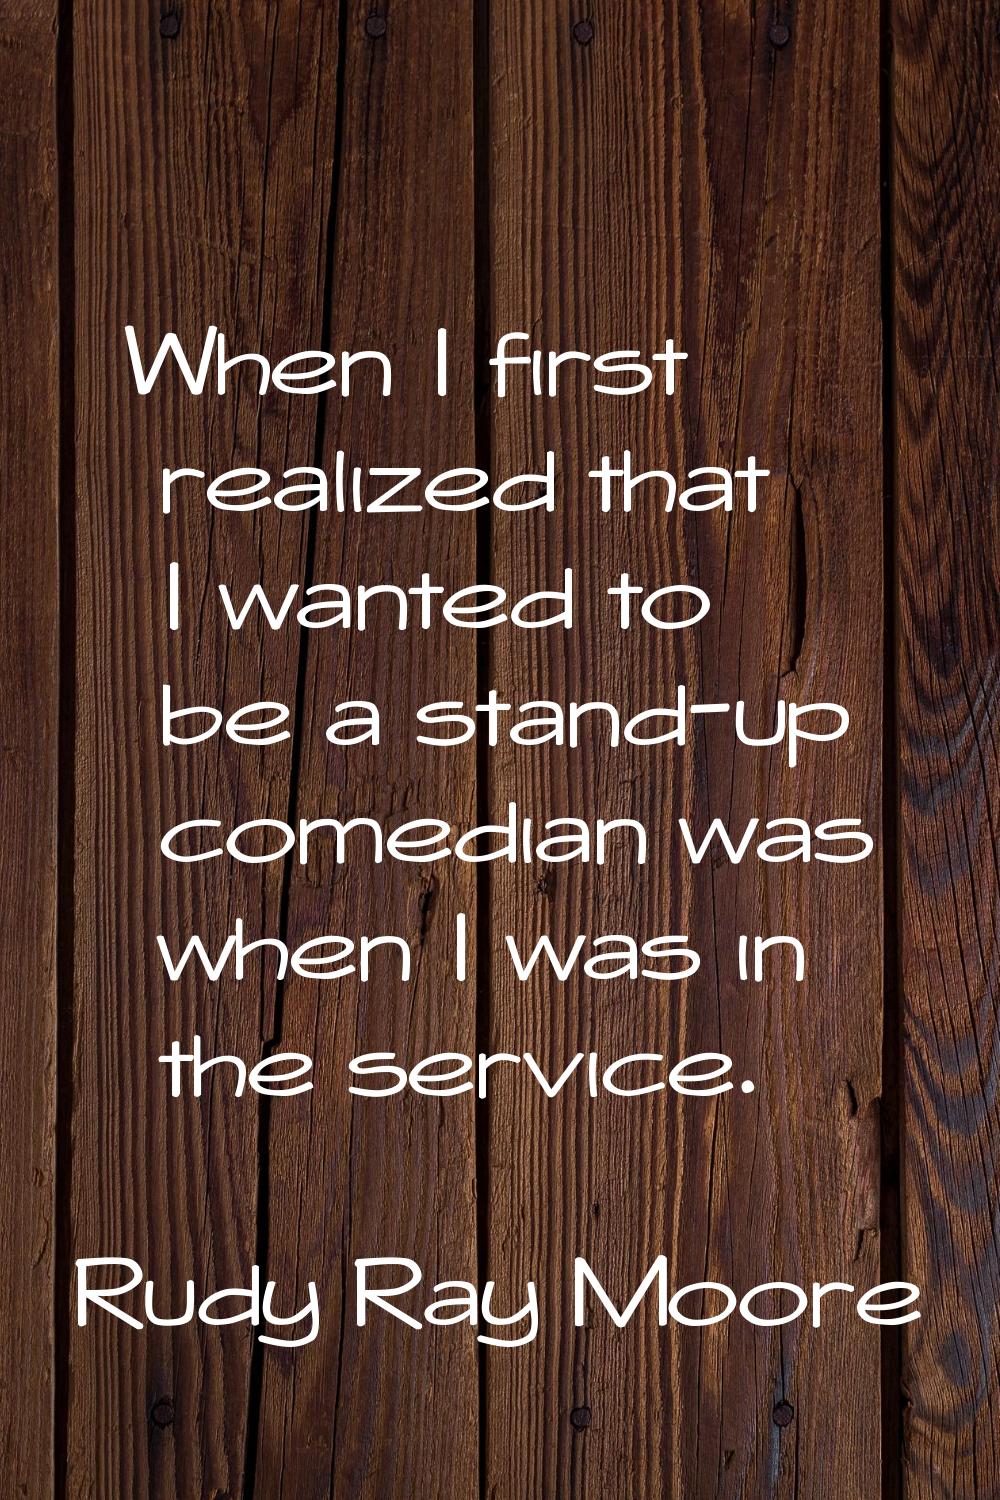 When I first realized that I wanted to be a stand-up comedian was when I was in the service.